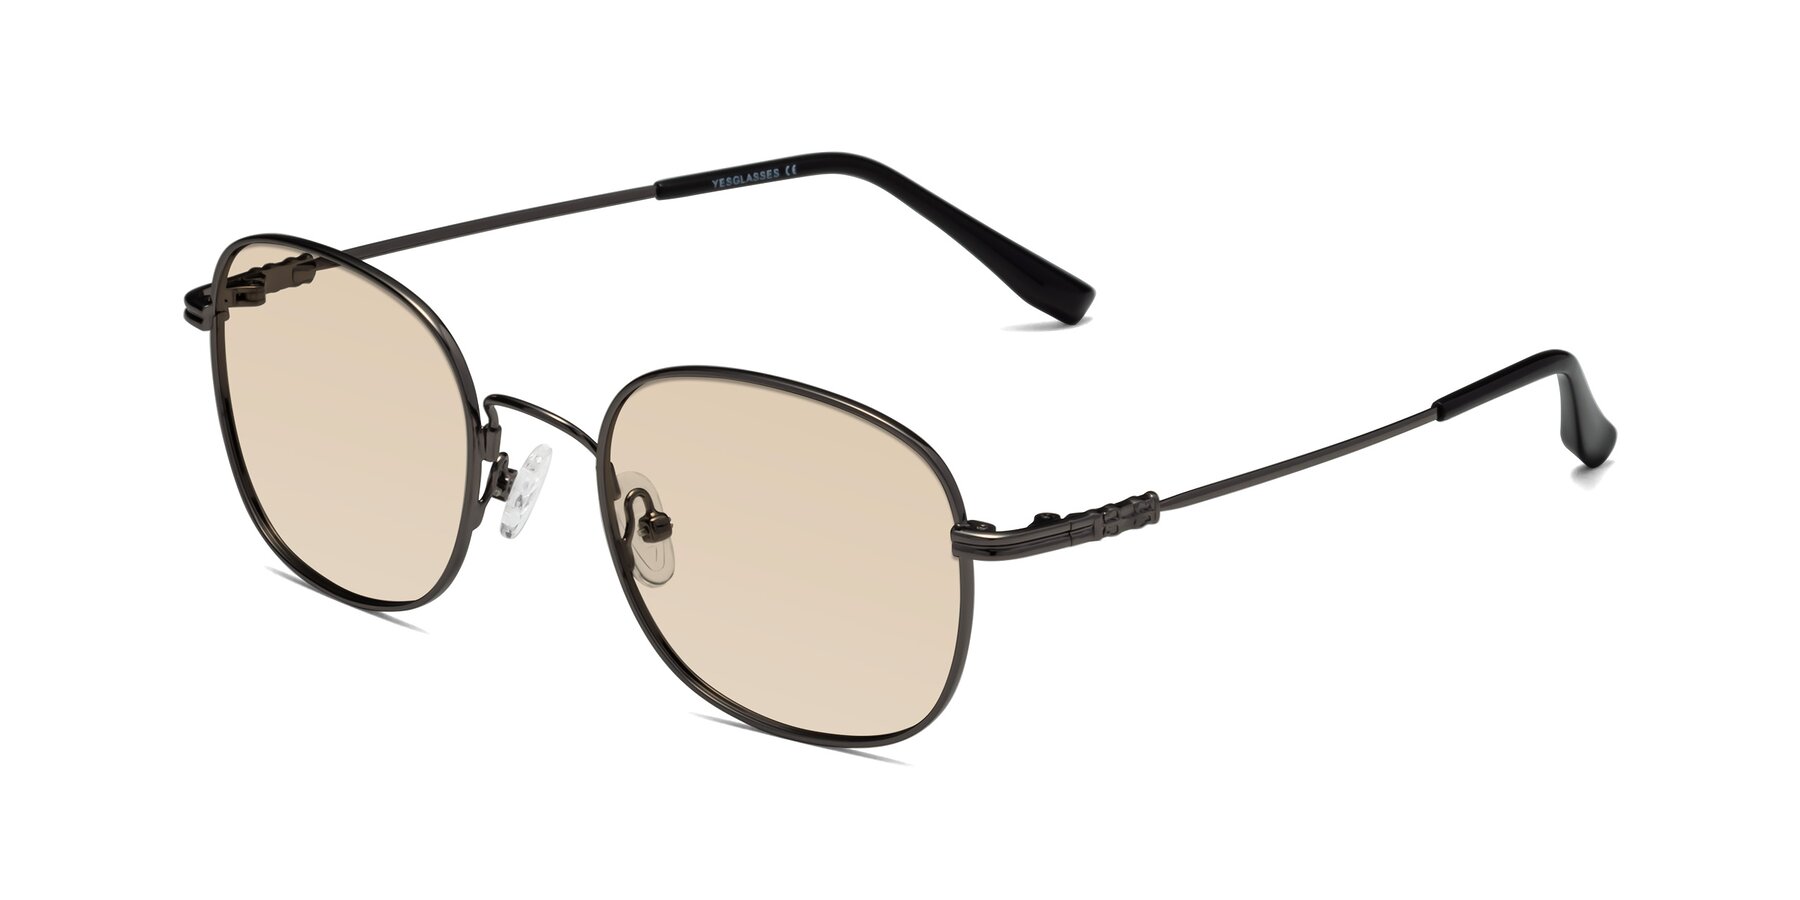 Angle of Roots in Gunmetal with Light Brown Tinted Lenses